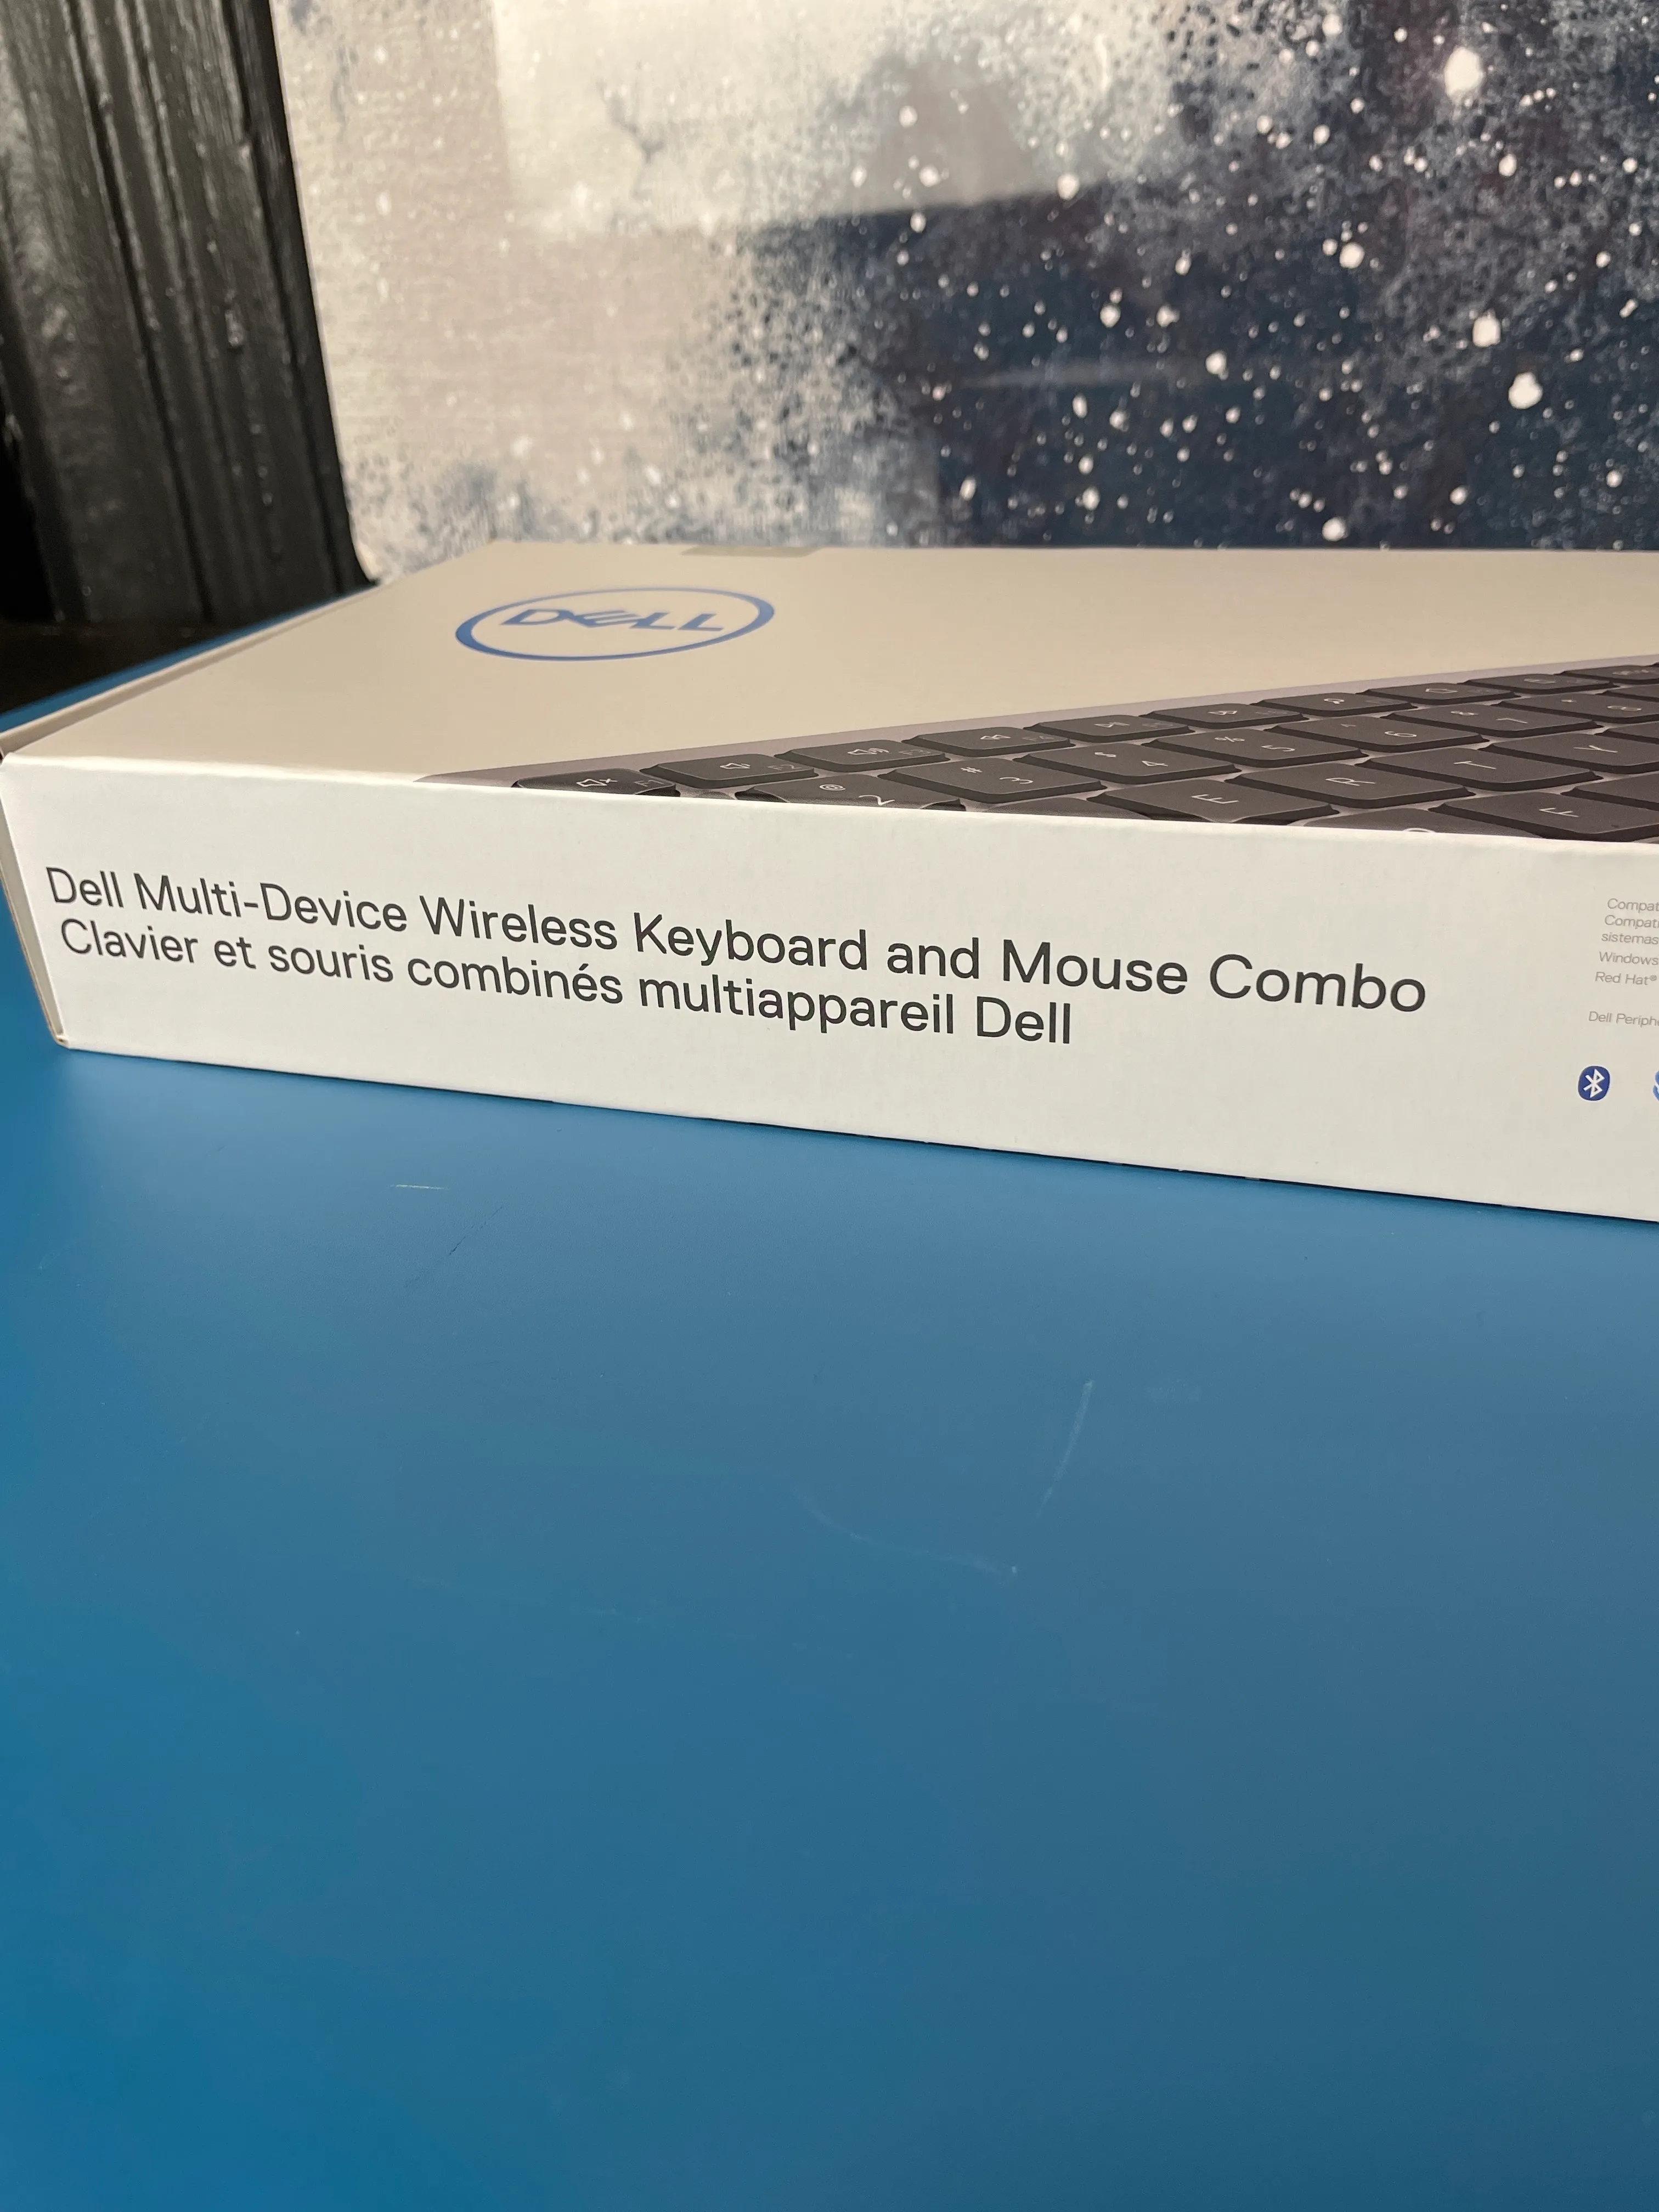 Dell Wireless Keyboard and Mouse 1 media